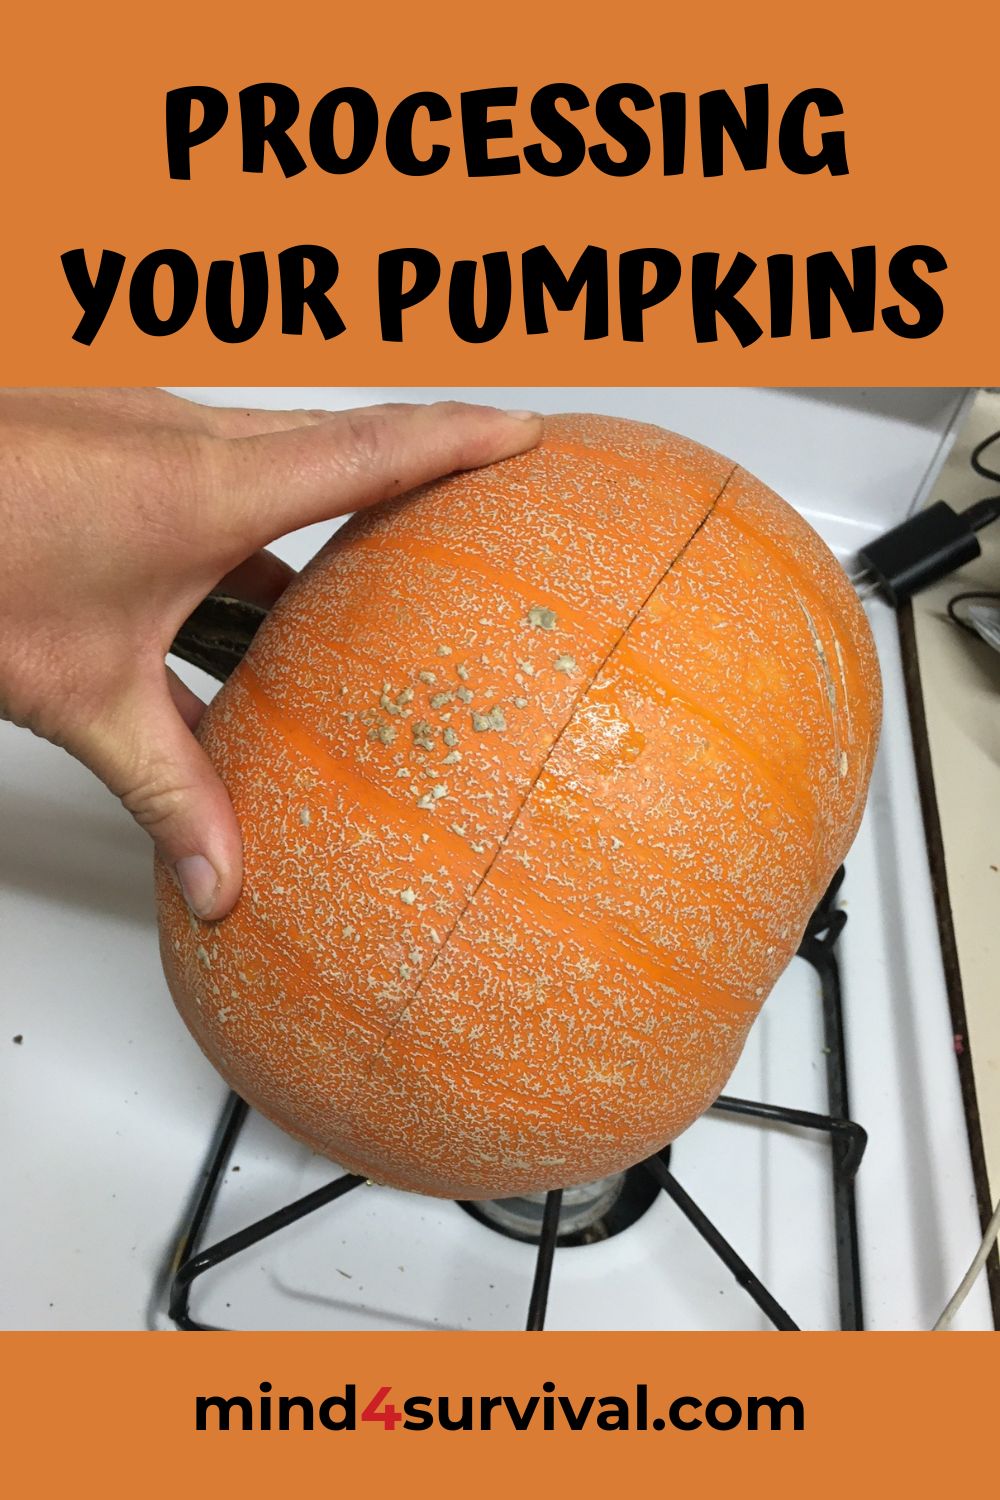 Prepping with Pumpkins